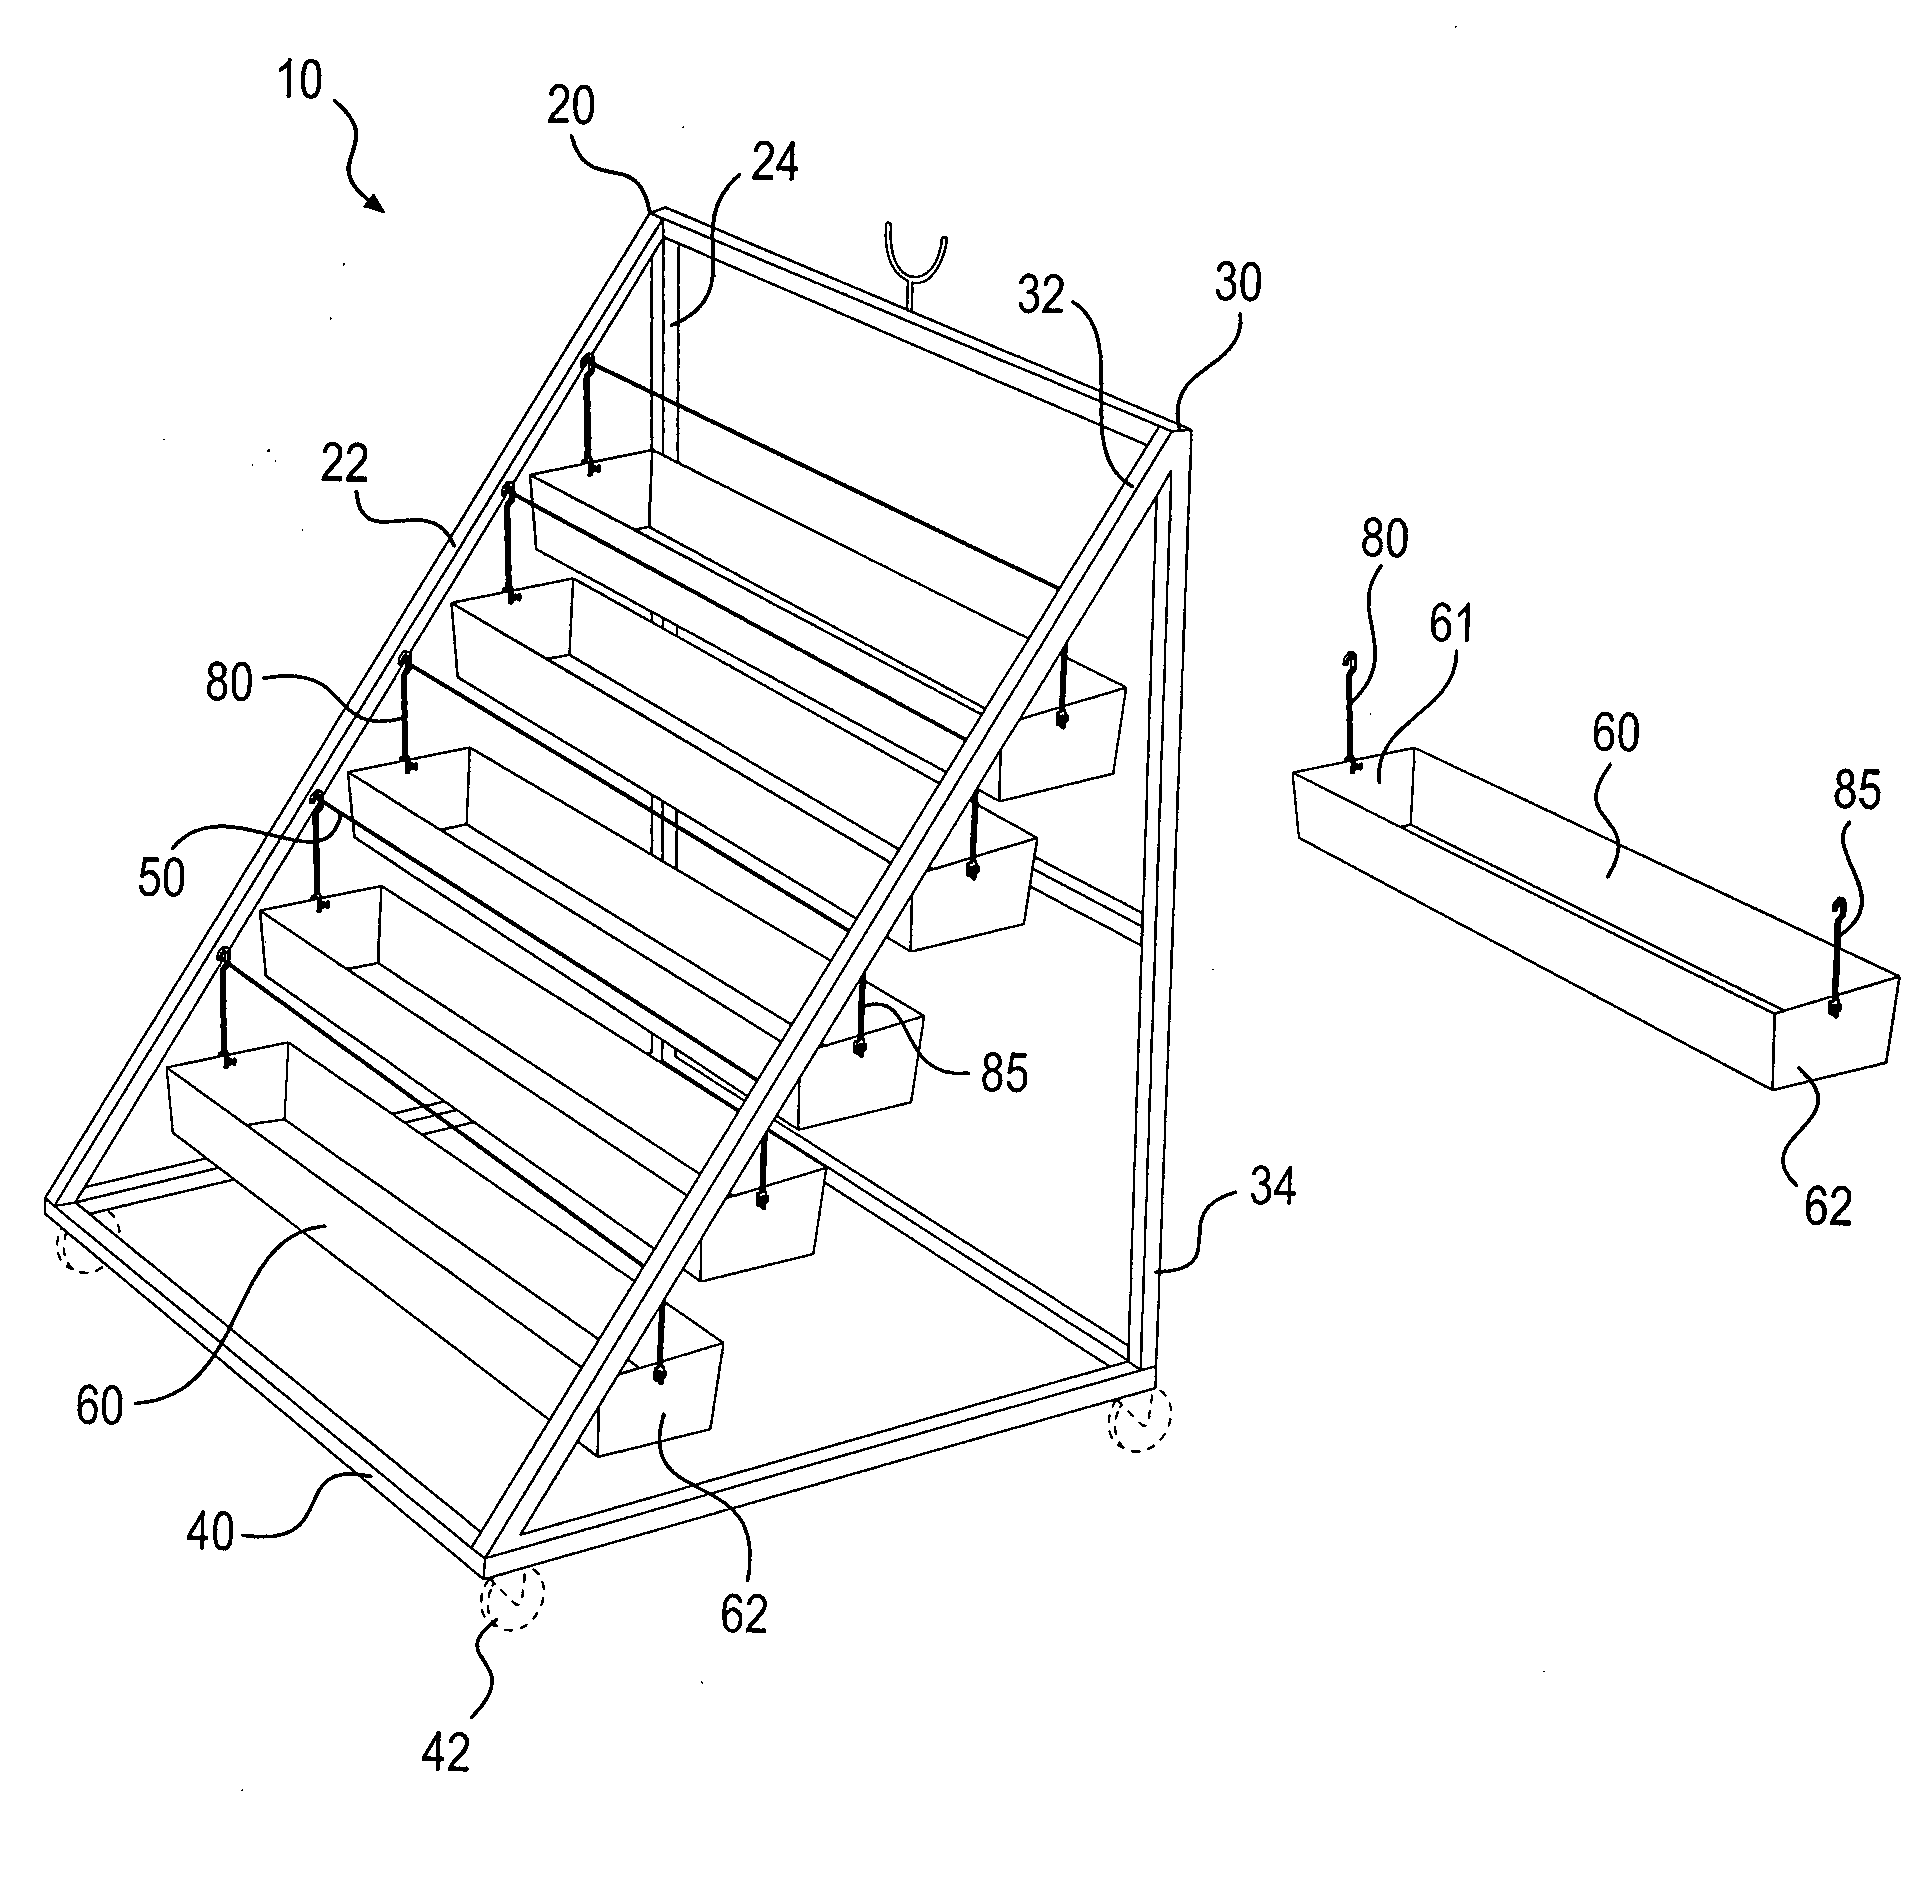 Multi-Tiered Rack System for Growing Crops and Plants